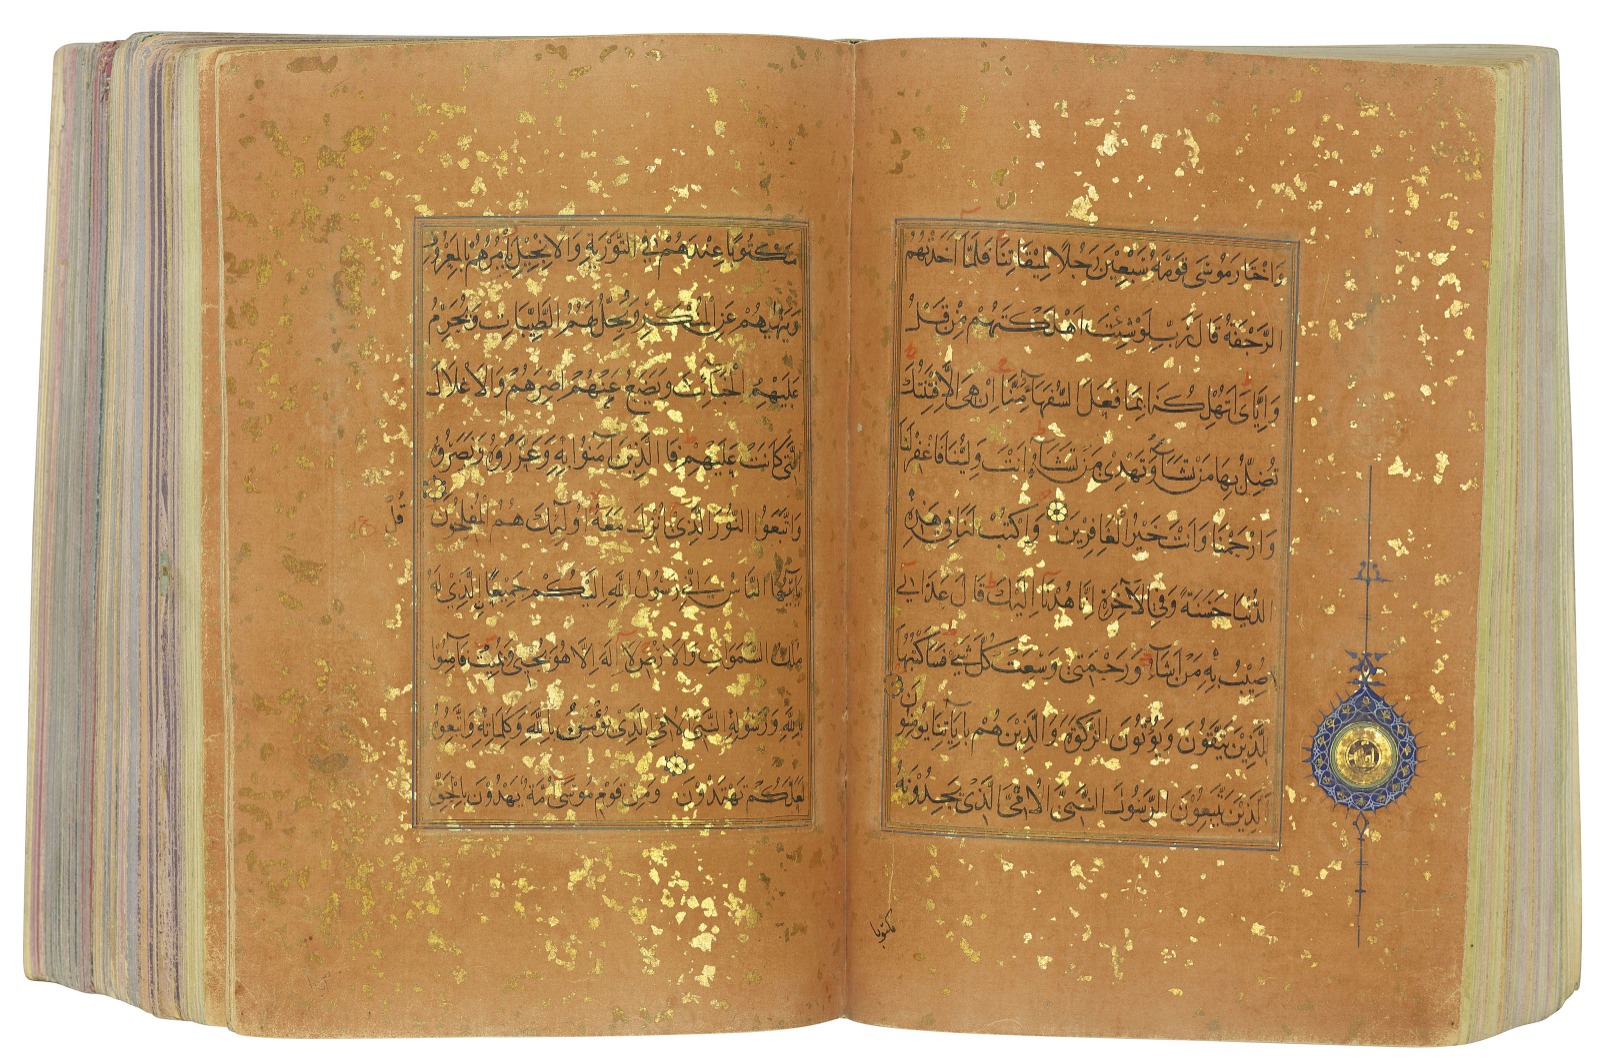 Why Can’t A Computer Rewrite A Verse Of The Qur’an? (Continues)